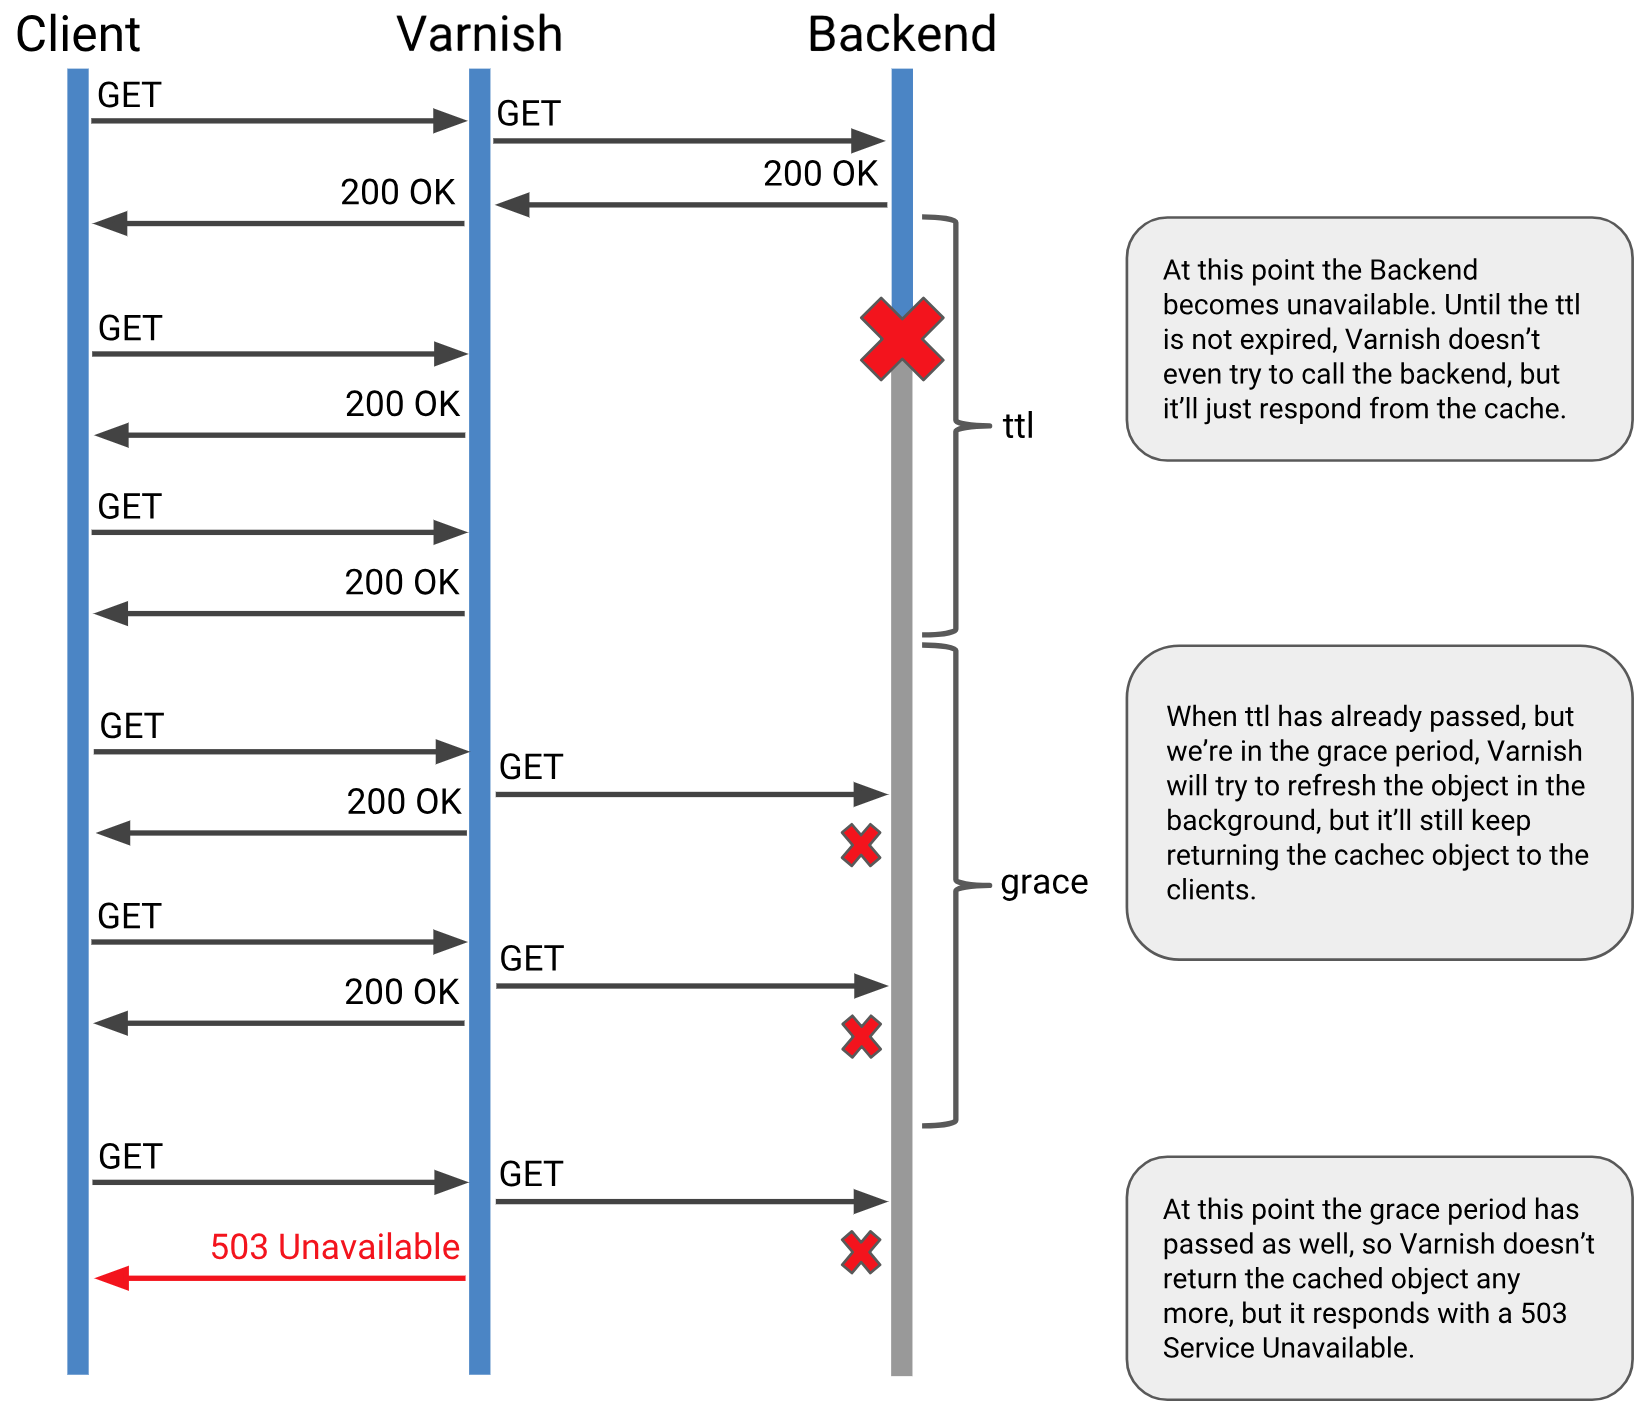 Sequence diagram showing how Varnish behaves when the backend is down during the grace period.